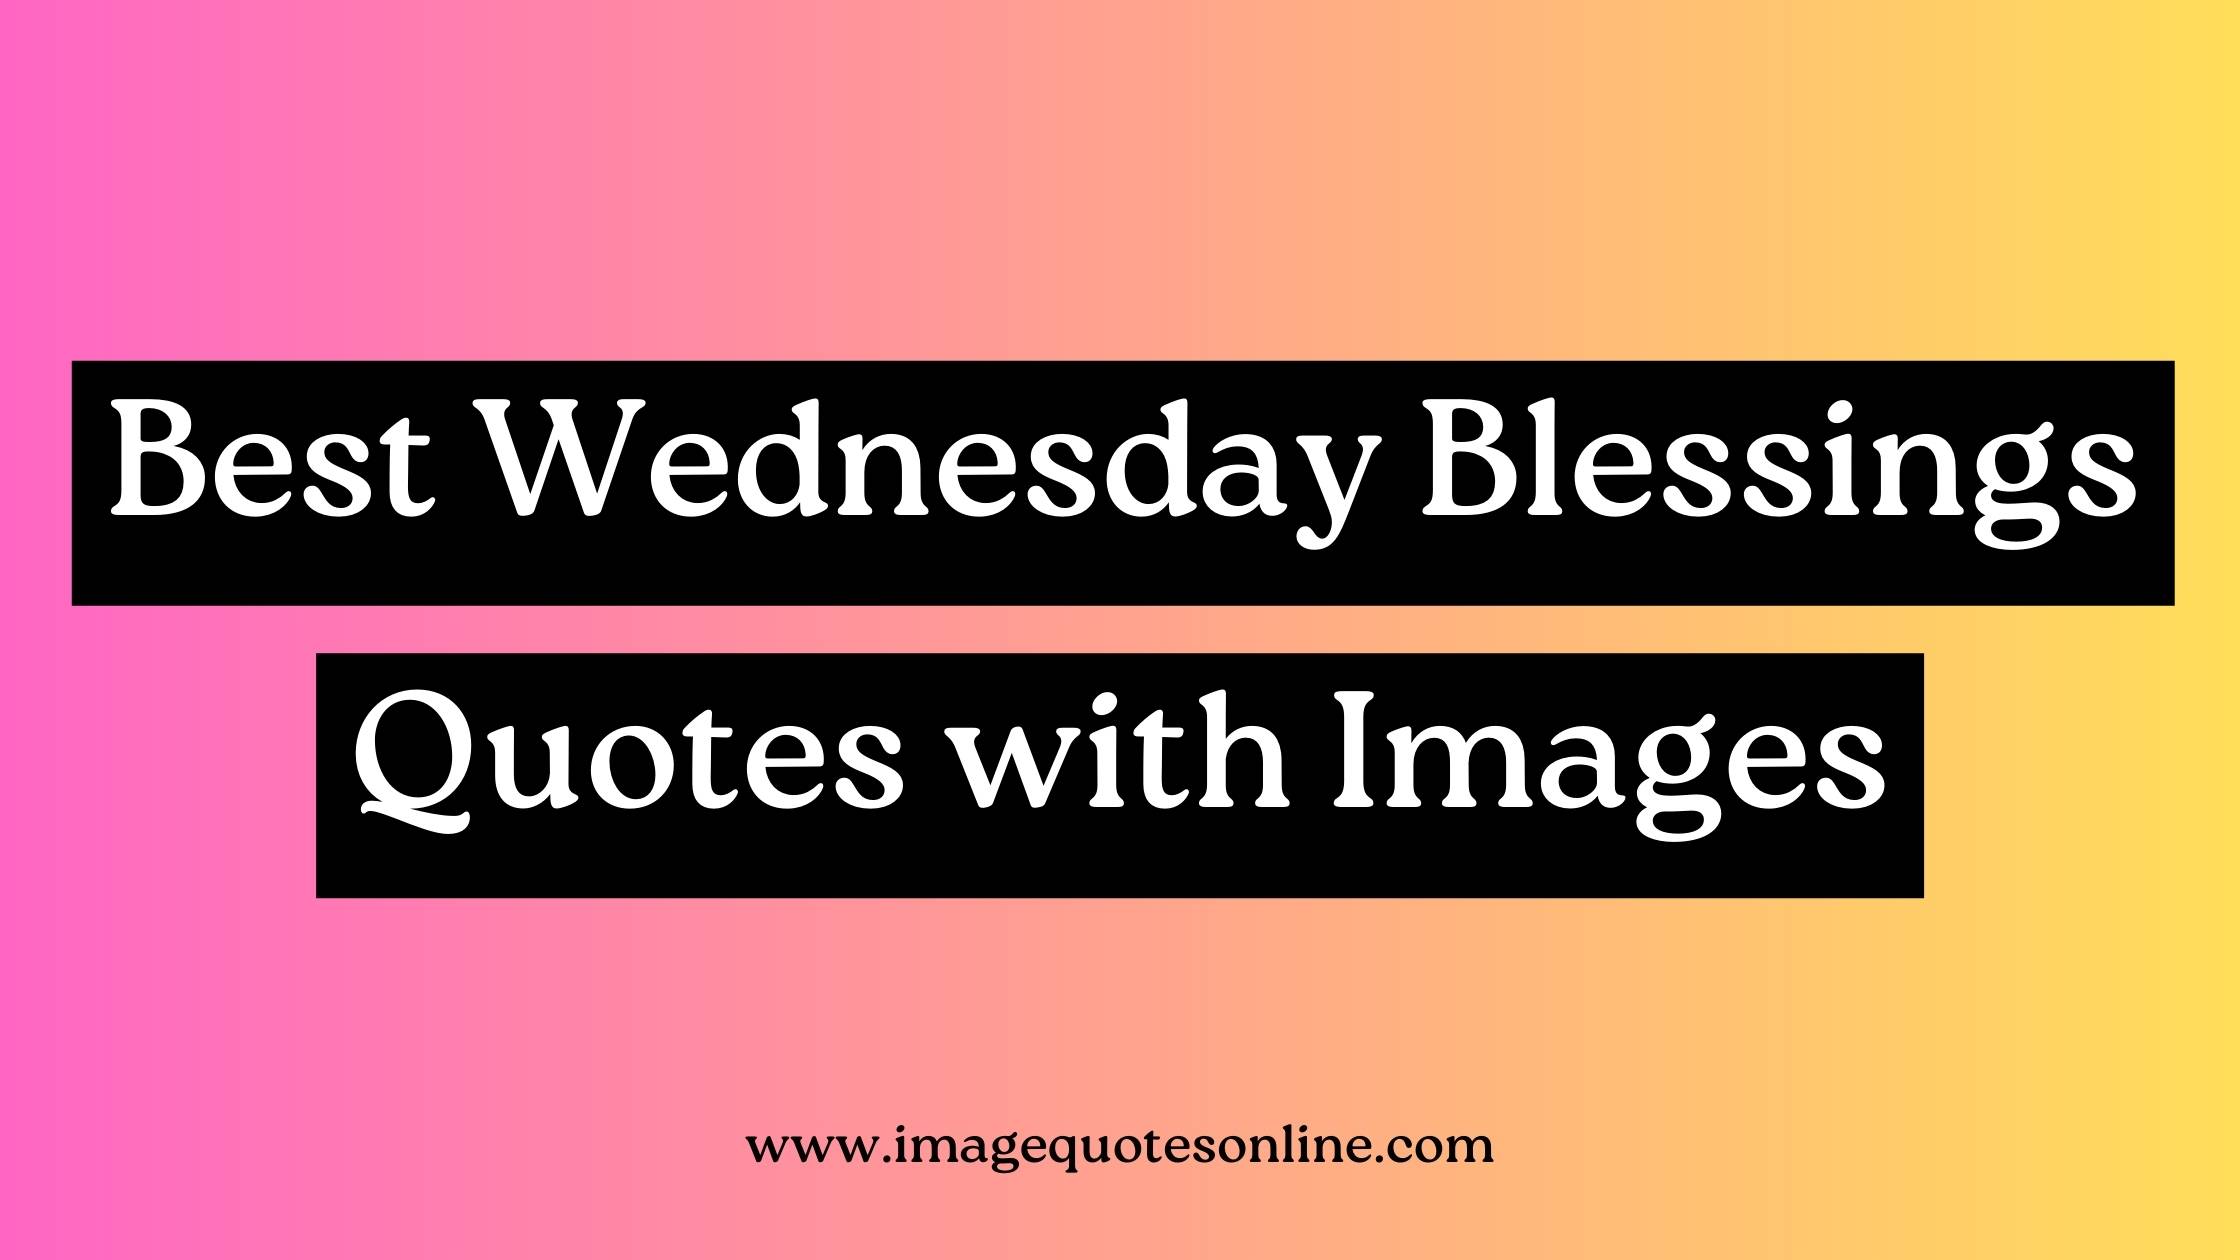 Wednesday Blessings Images and Quotes